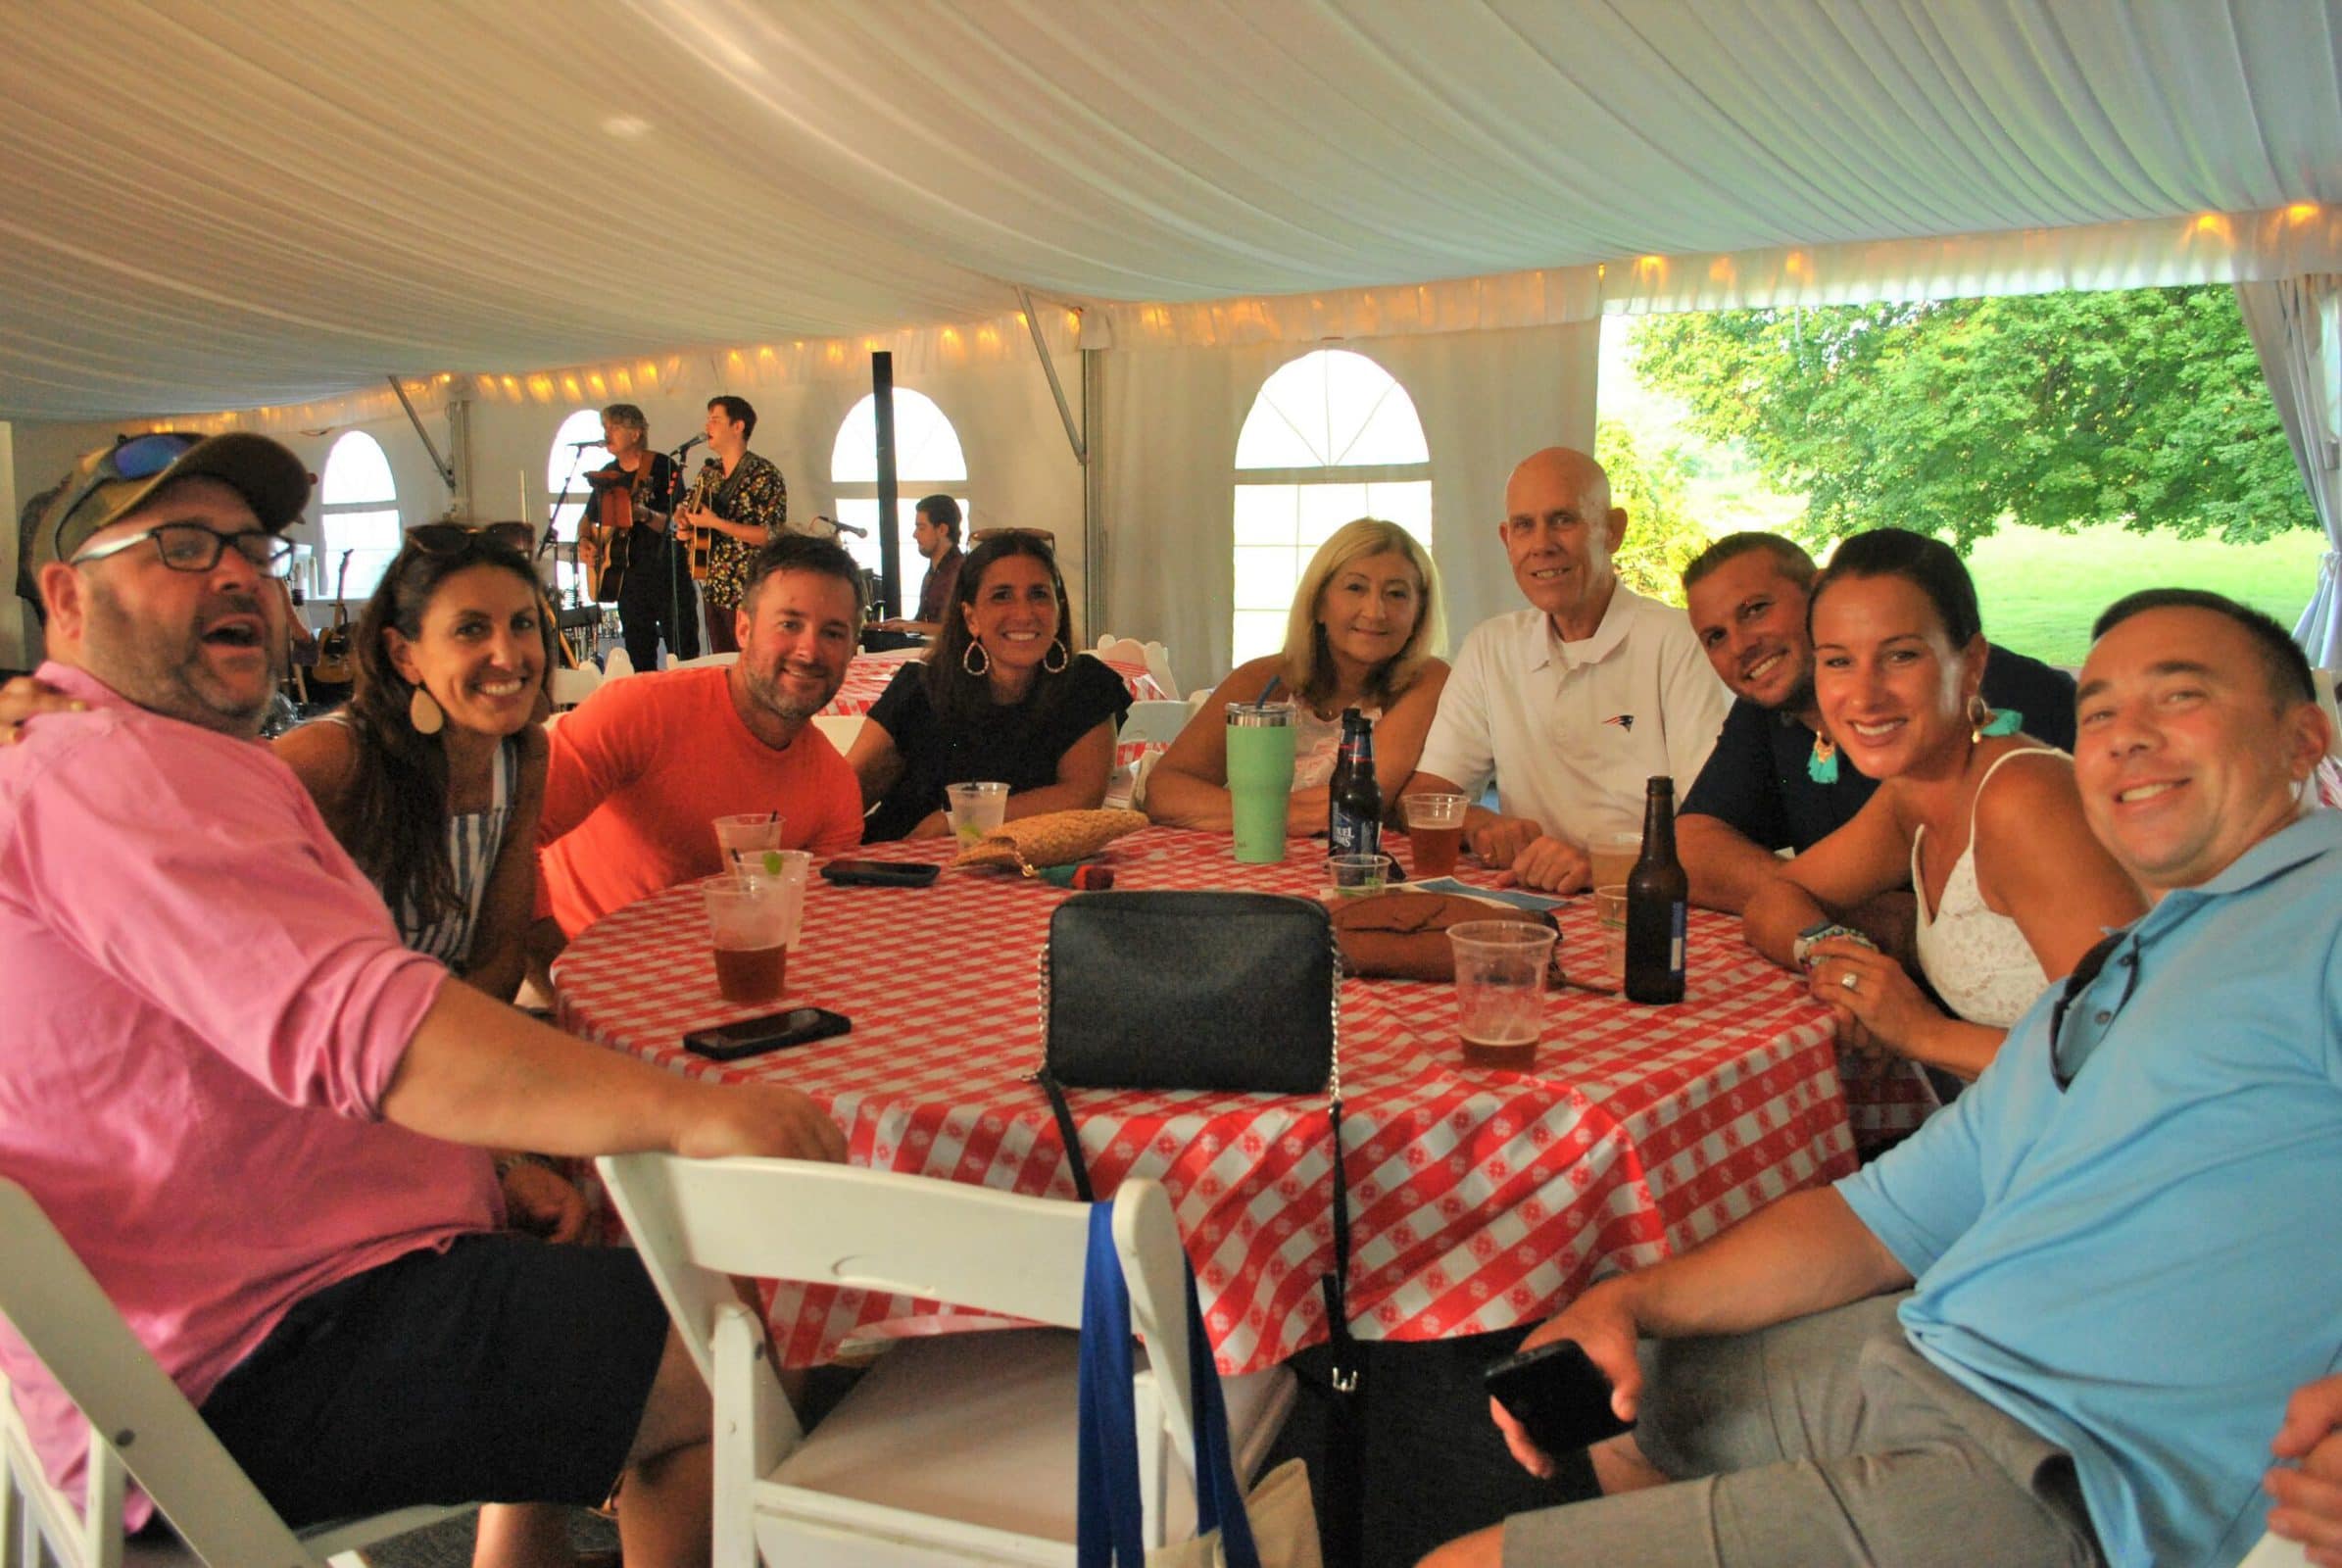 Local business people gathered at Marlborough’s Wayside Inn for the Marlborough Regional Chamber of Commerce’s BBQ, Bands and Brew event on Aug. 27. (Photo/Dakota Antelman)